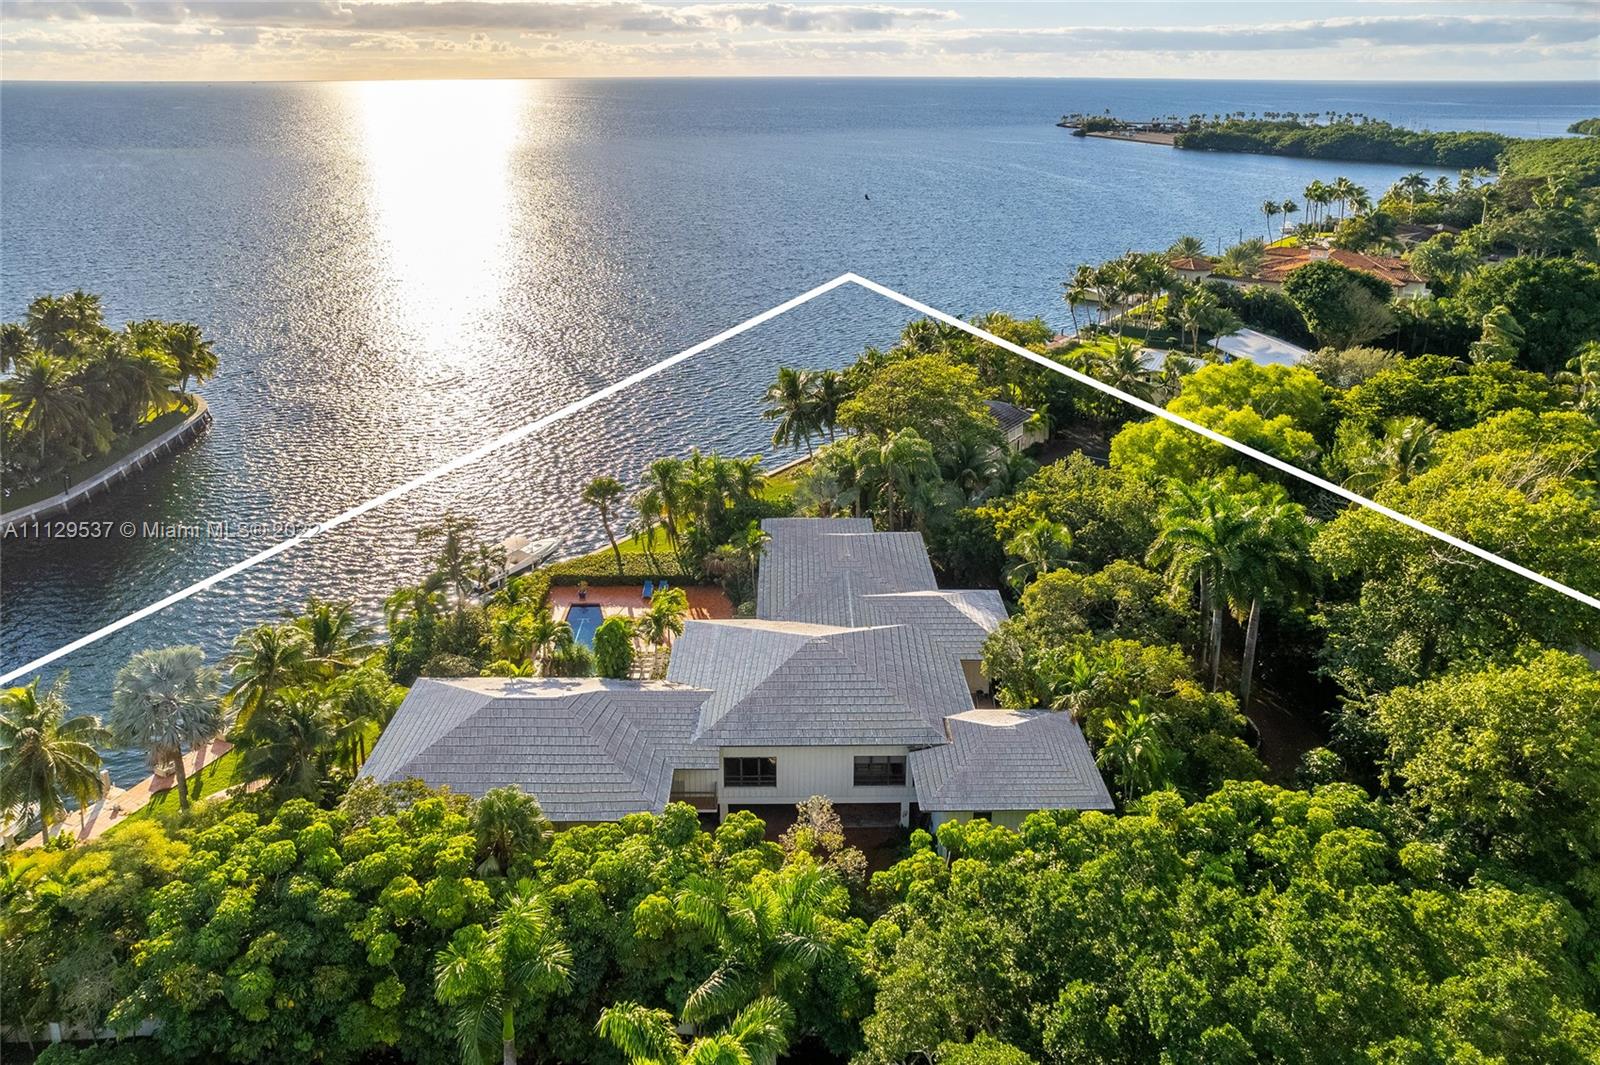 Once in a lifetime opportunity to own the largest and most exclusive waterfront lot in all of Old Cutler Bay! Build your dream home on this 1.6+ acre property which offers 390 ft of wide open bay views and direct access to the Atlantic Ocean. Sprawling estate is complete with a private tennis court and lush grounds and landscaping including stunning tall palm trees and Rainbow eucalyptus trees that allow for ultimate privacy and relaxation. The main home sits 18 feet above sea level. Enjoy views from Downtown all the way to Key Biscayne with unimpeded East views and magnificent sunrise and moonrises. Rare opportunity to develop your own custom masterpiece in one of Coral Gables’ most desirable, guard gated neighborhoods.